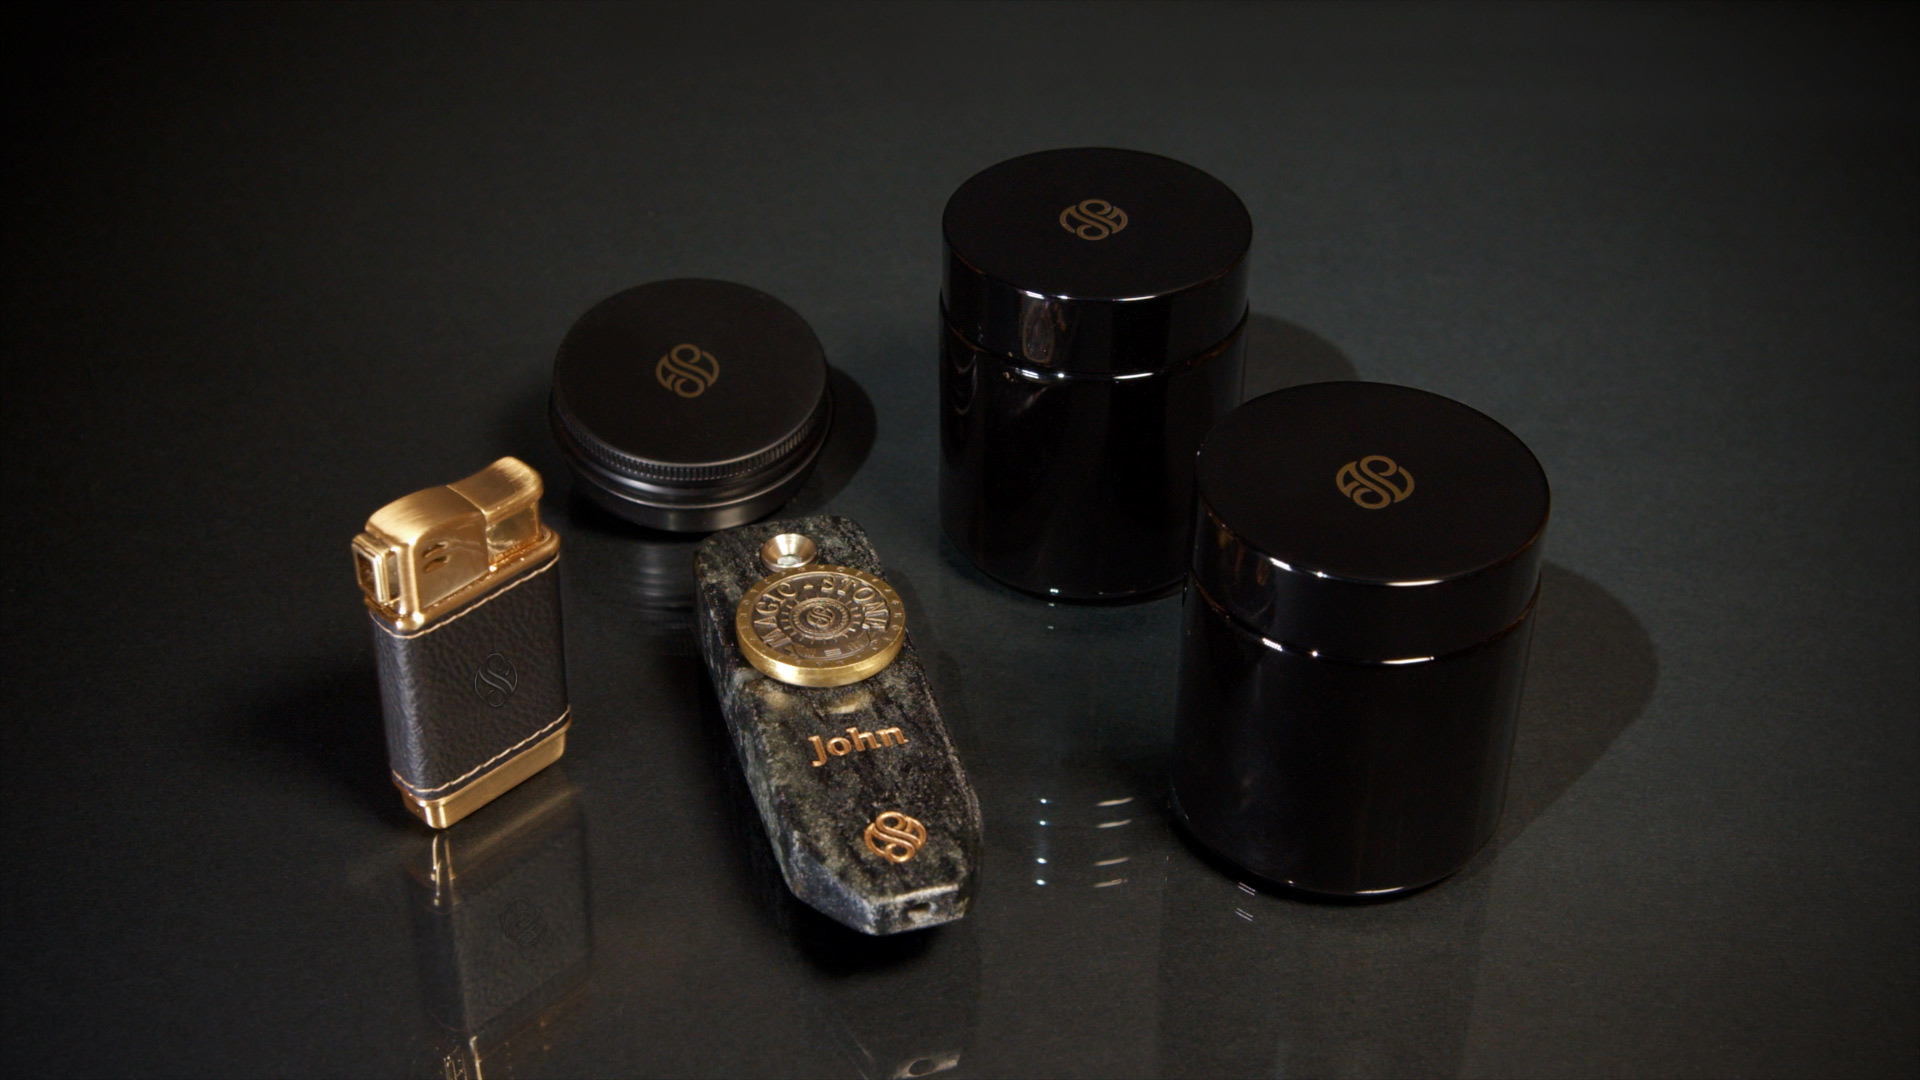 MagicStone Optimum Package includes our custom Flame lighter, 2 Dragon Glass stash jars and a tin with a dozen baskets.